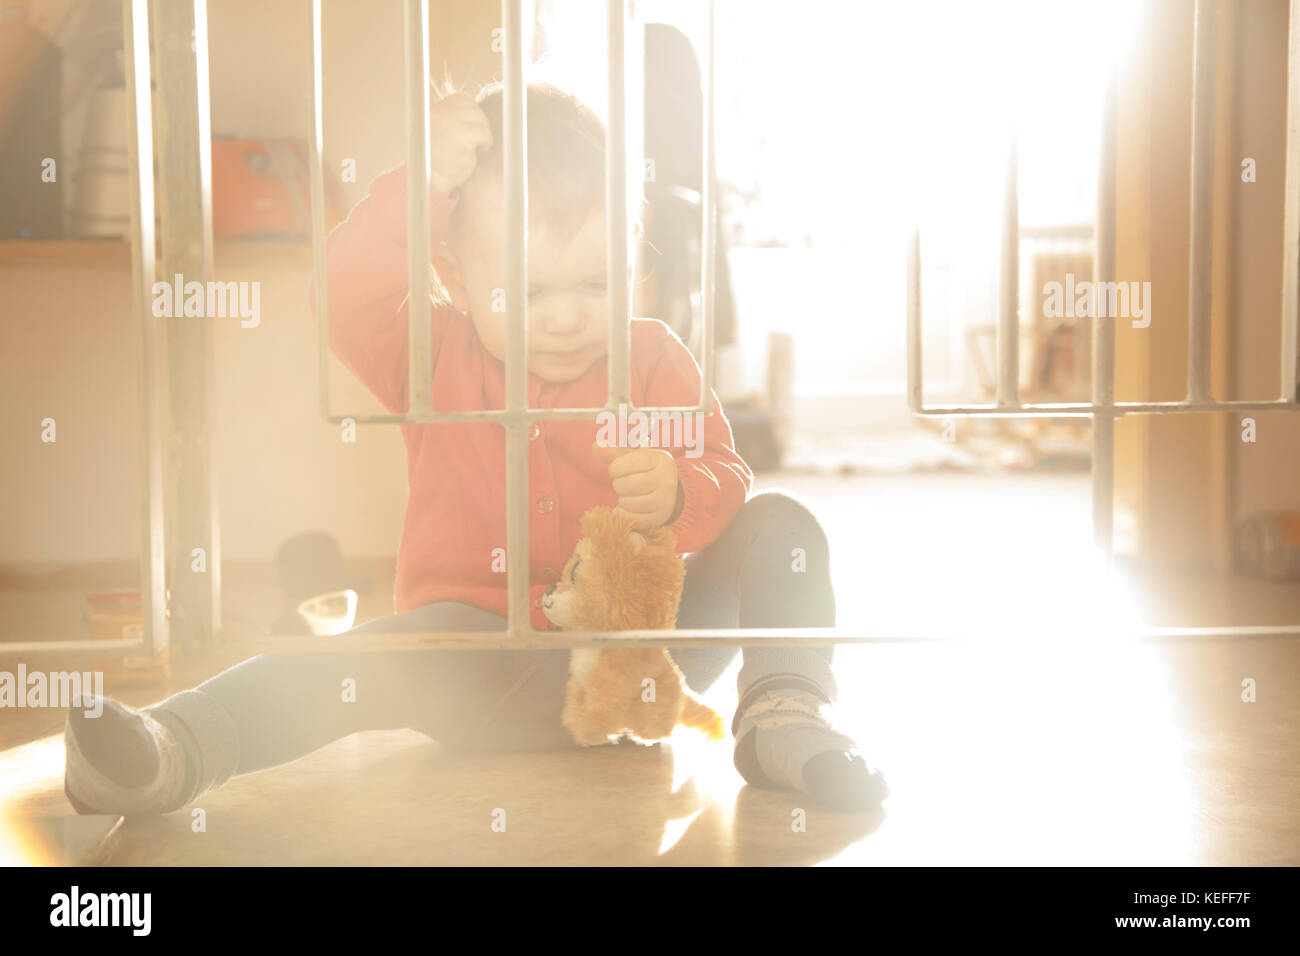 Little baby girl playing with toy behind the bars inside of the house in the morning sunlight. Stock Photo